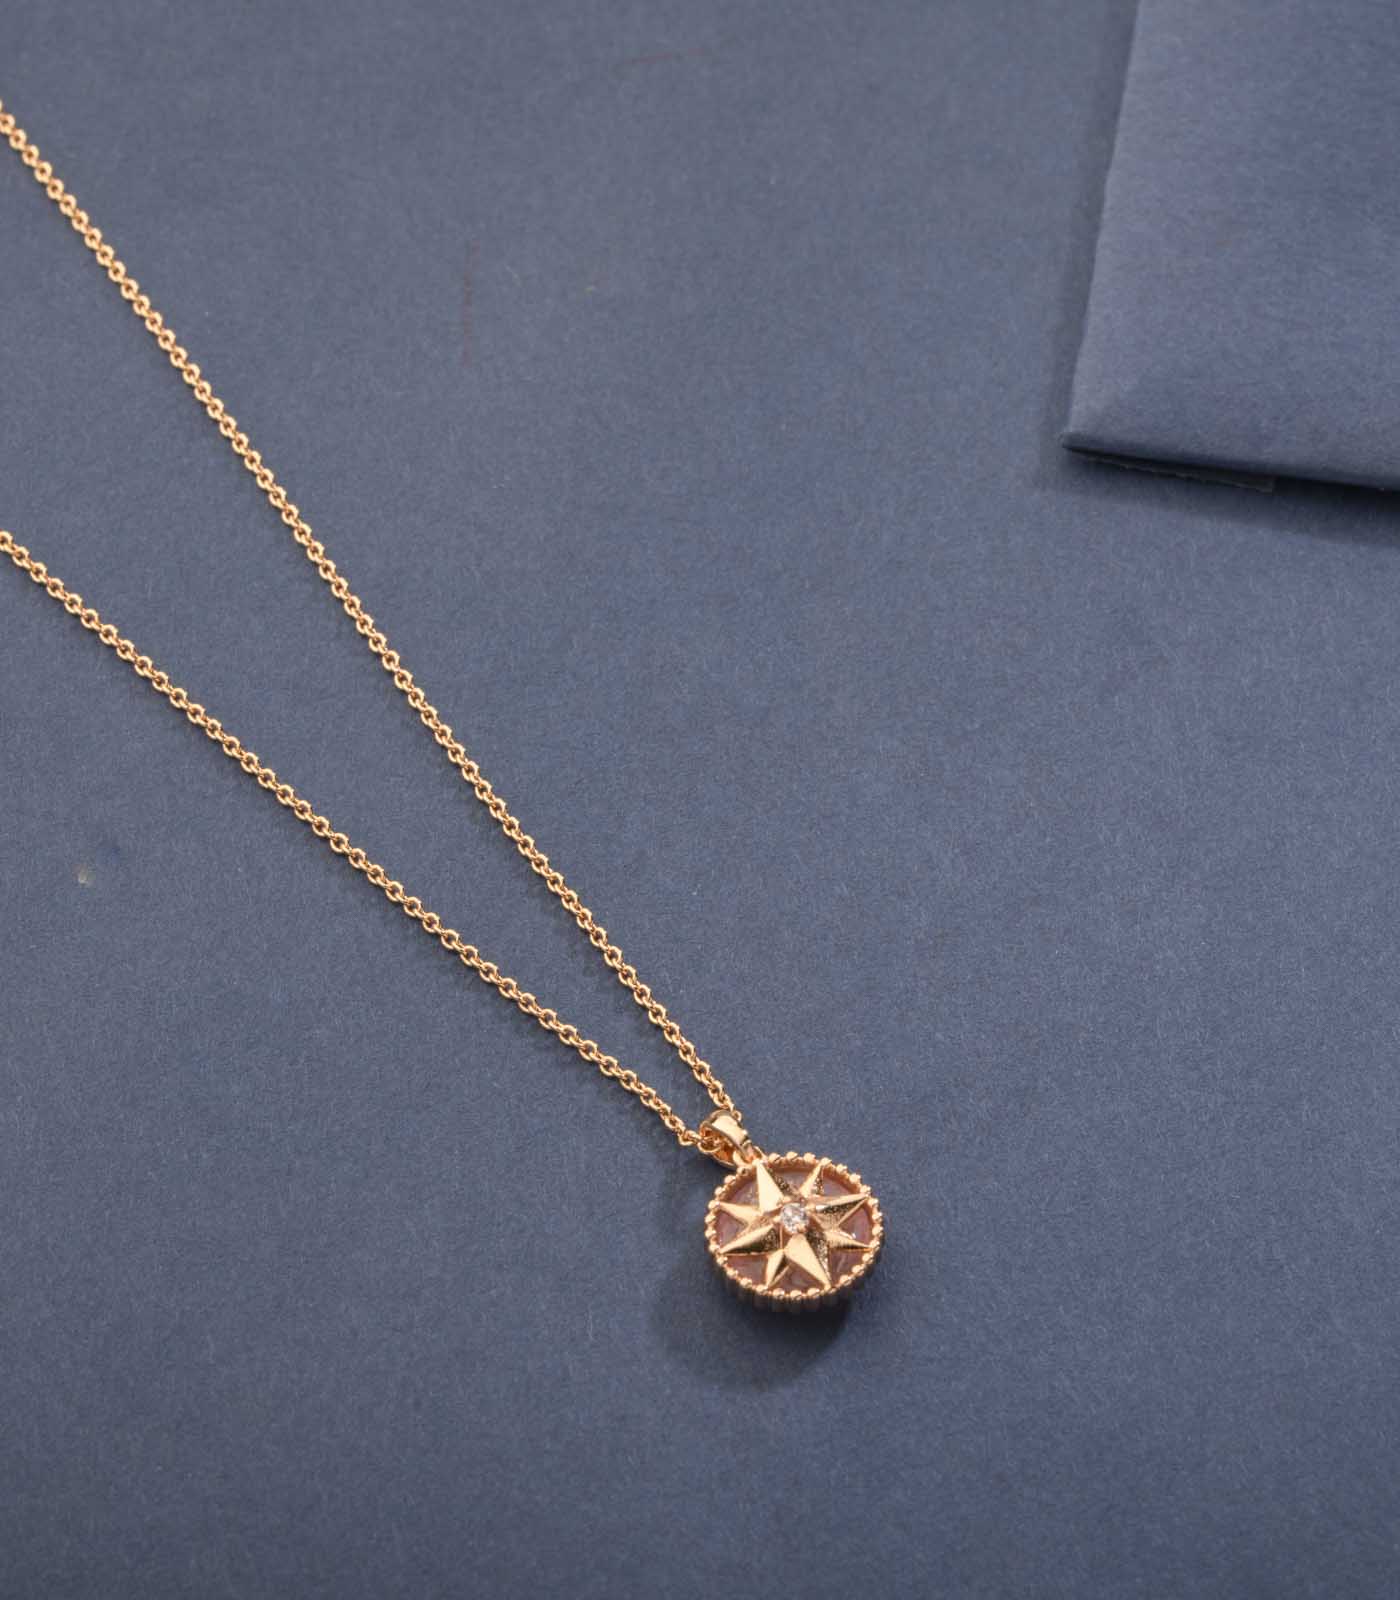 Hand Crafted Beautiful Brass Compass Necklace (Brass)